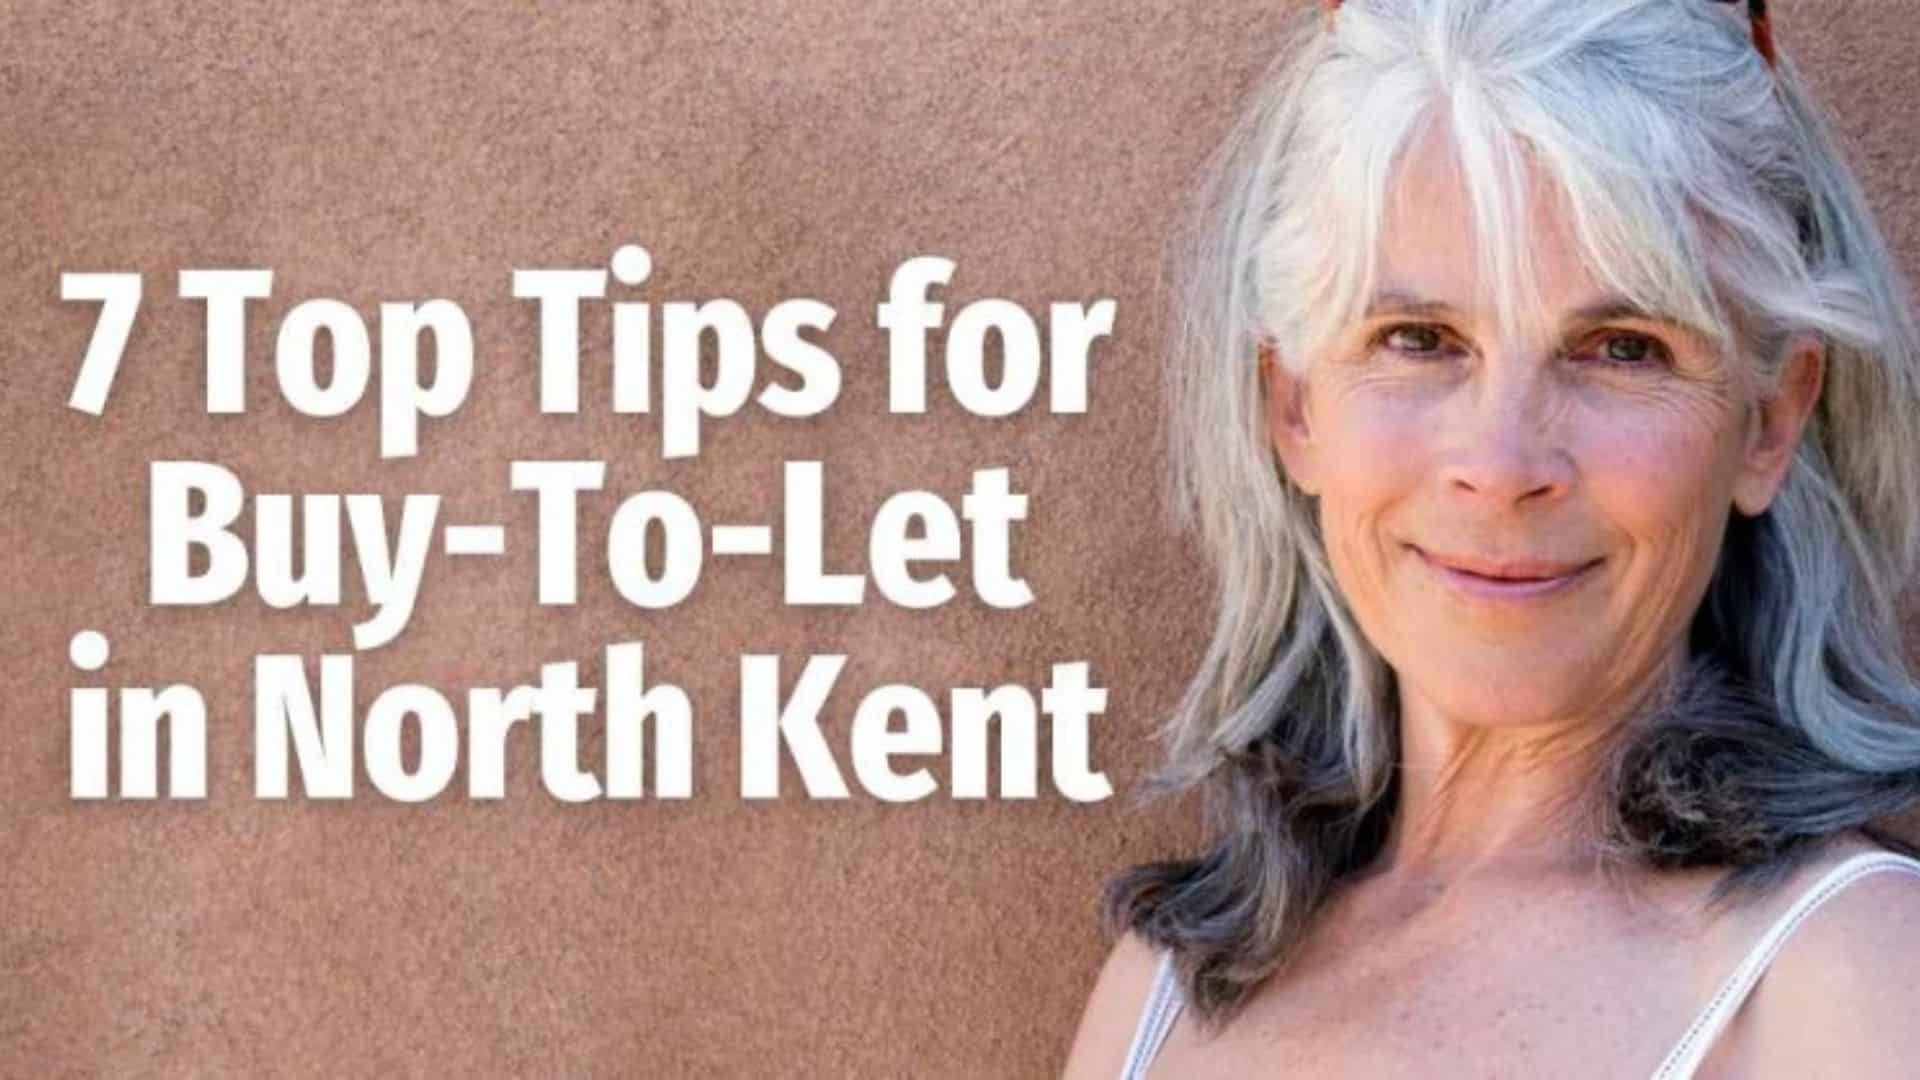 7 Top Tips For Buy-To-Let In North Kent